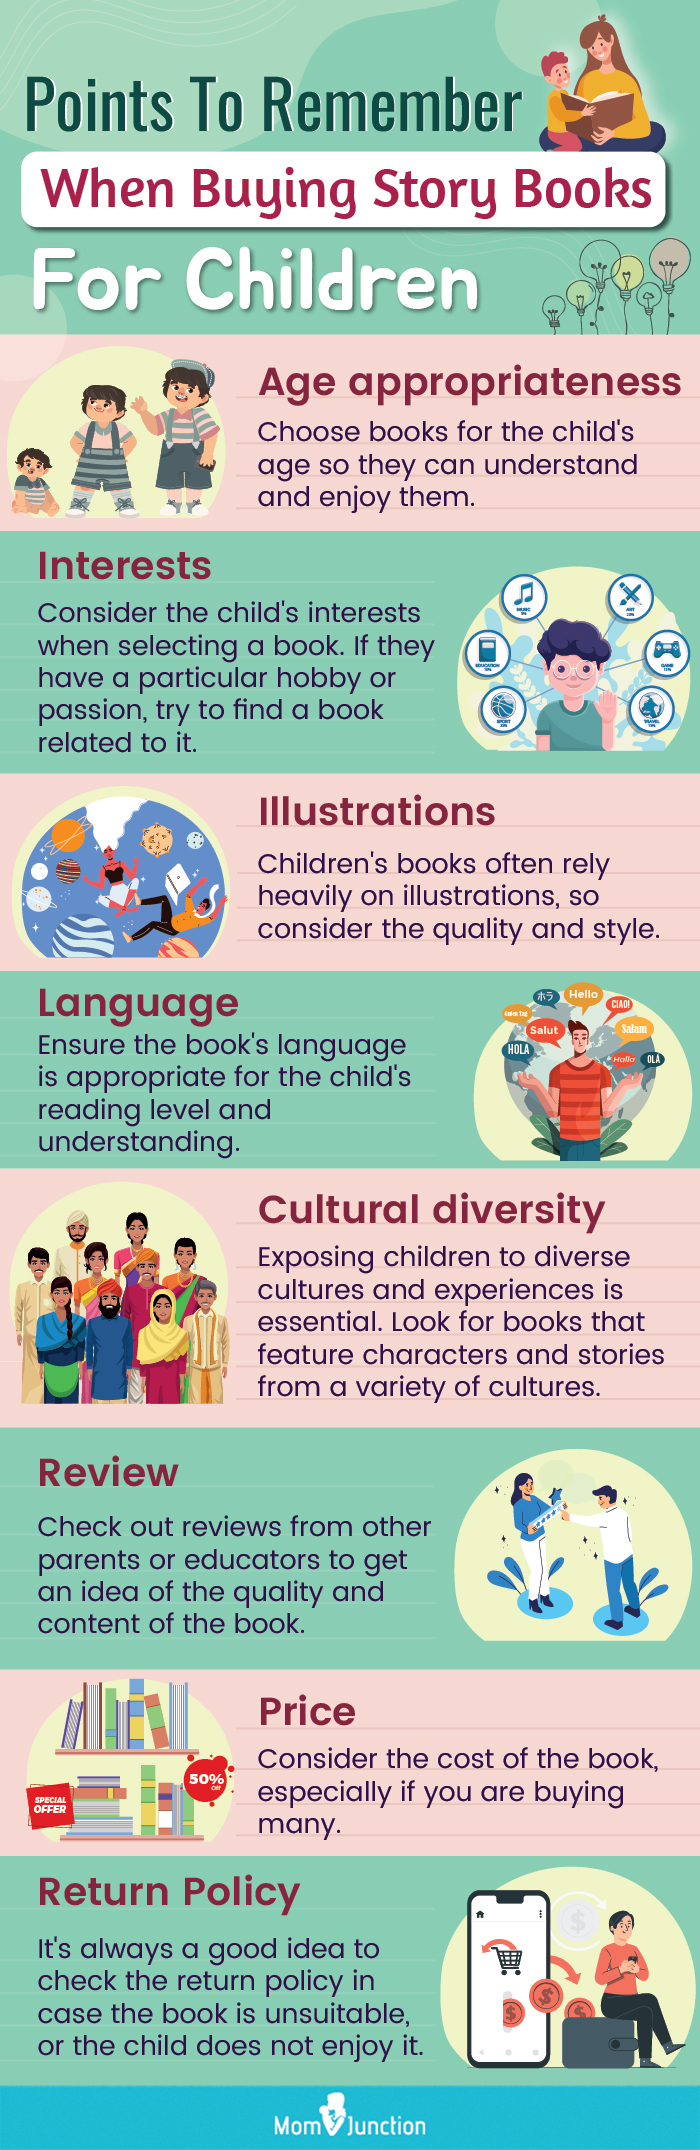 Points To Remember When Buying Story Books For Children [infographic]